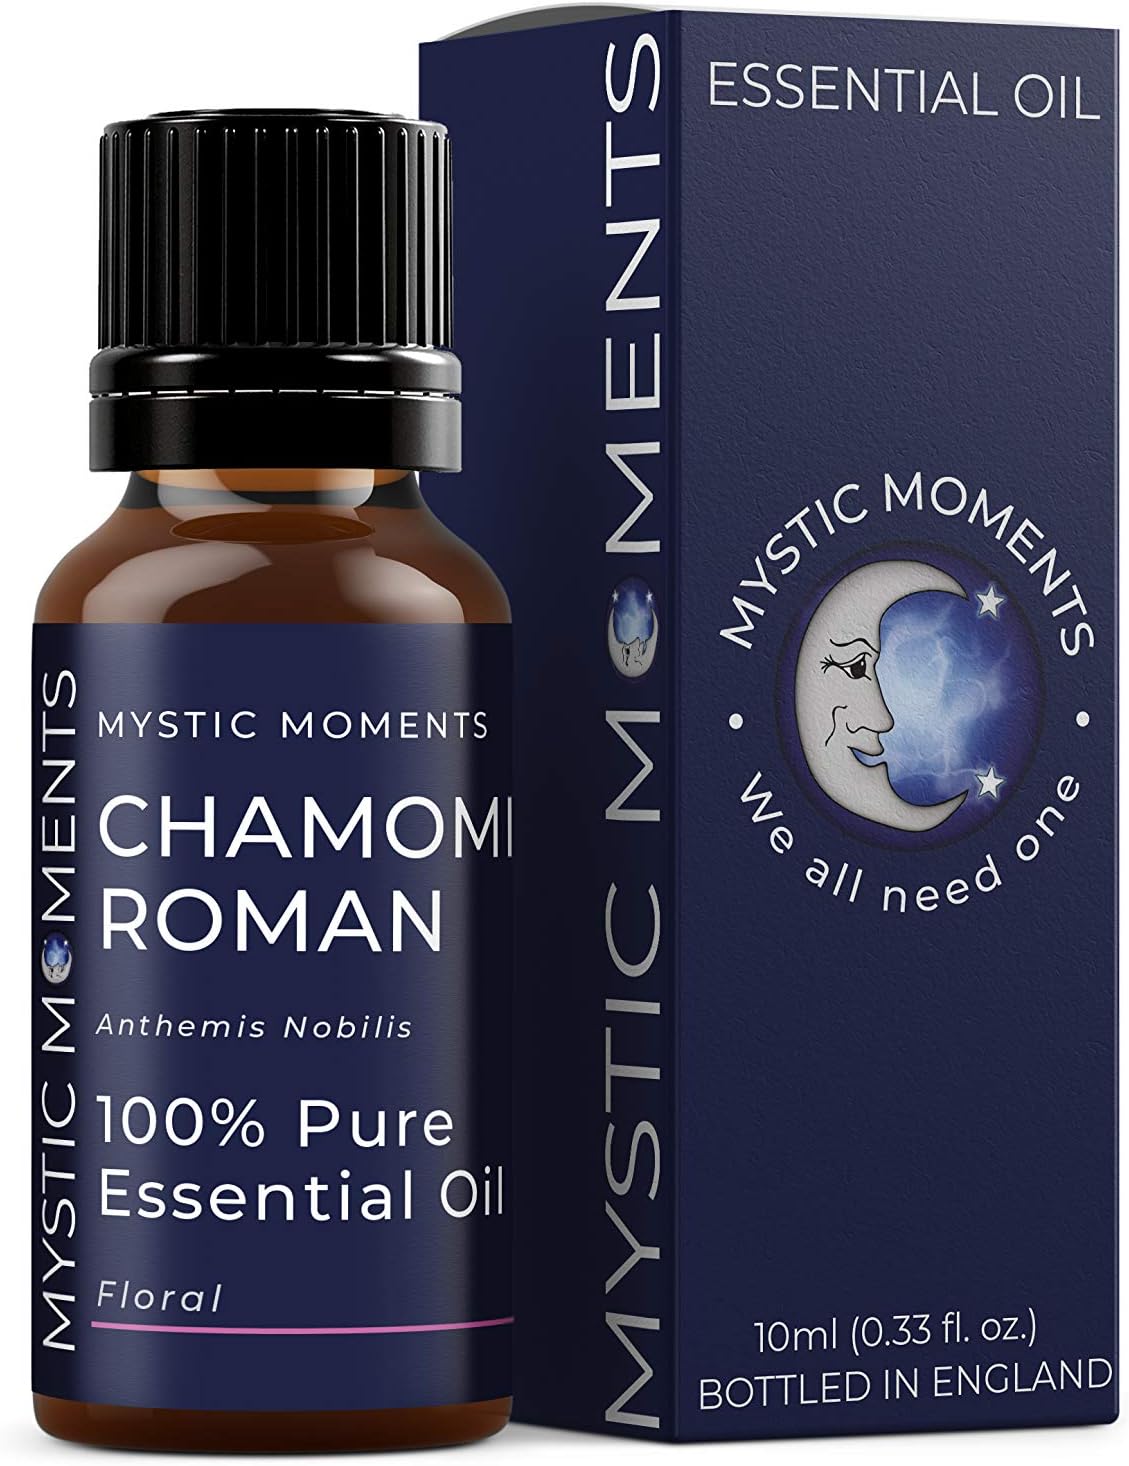 Mystic Moments | Chamomile Roman Essential Oil 10ml - Pure & Natural oil for Diffusers, Aromatherapy & Massage Blends Vegan GMO Free